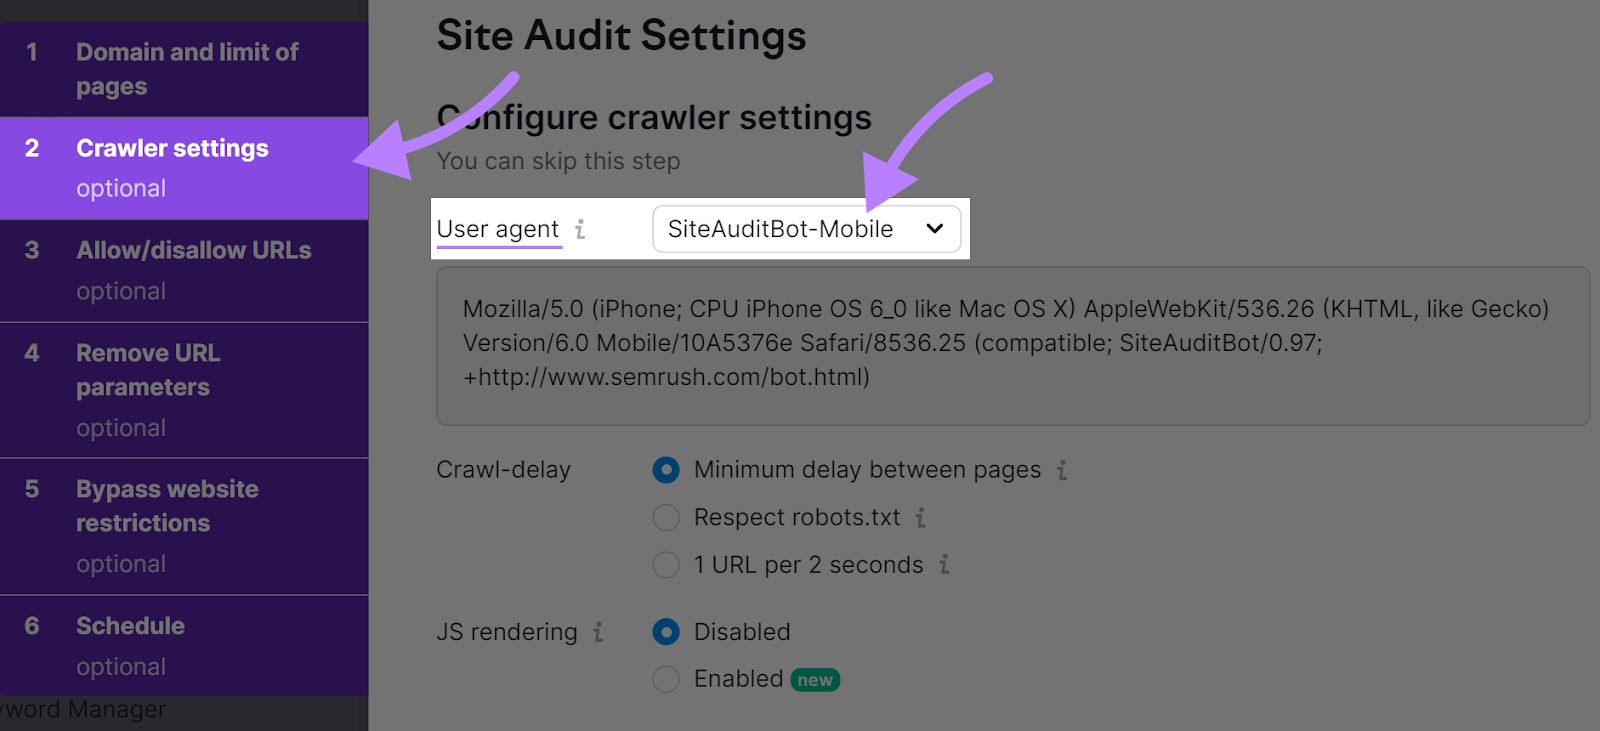 “User agent” set to “SiteAuditBot-Mobile” in Site Audit “Crawler settings”